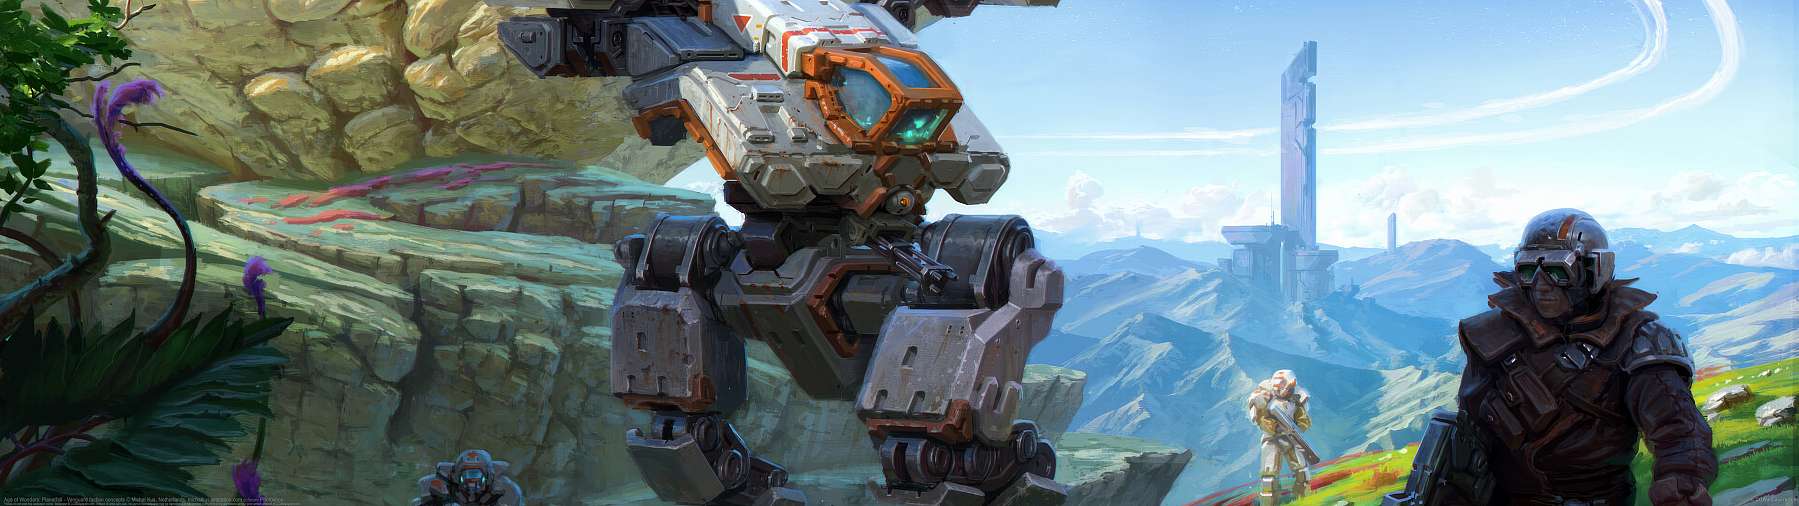 Age of Wonders: Planetfall - Vanguard faction concepts ultralarge fond d'cran